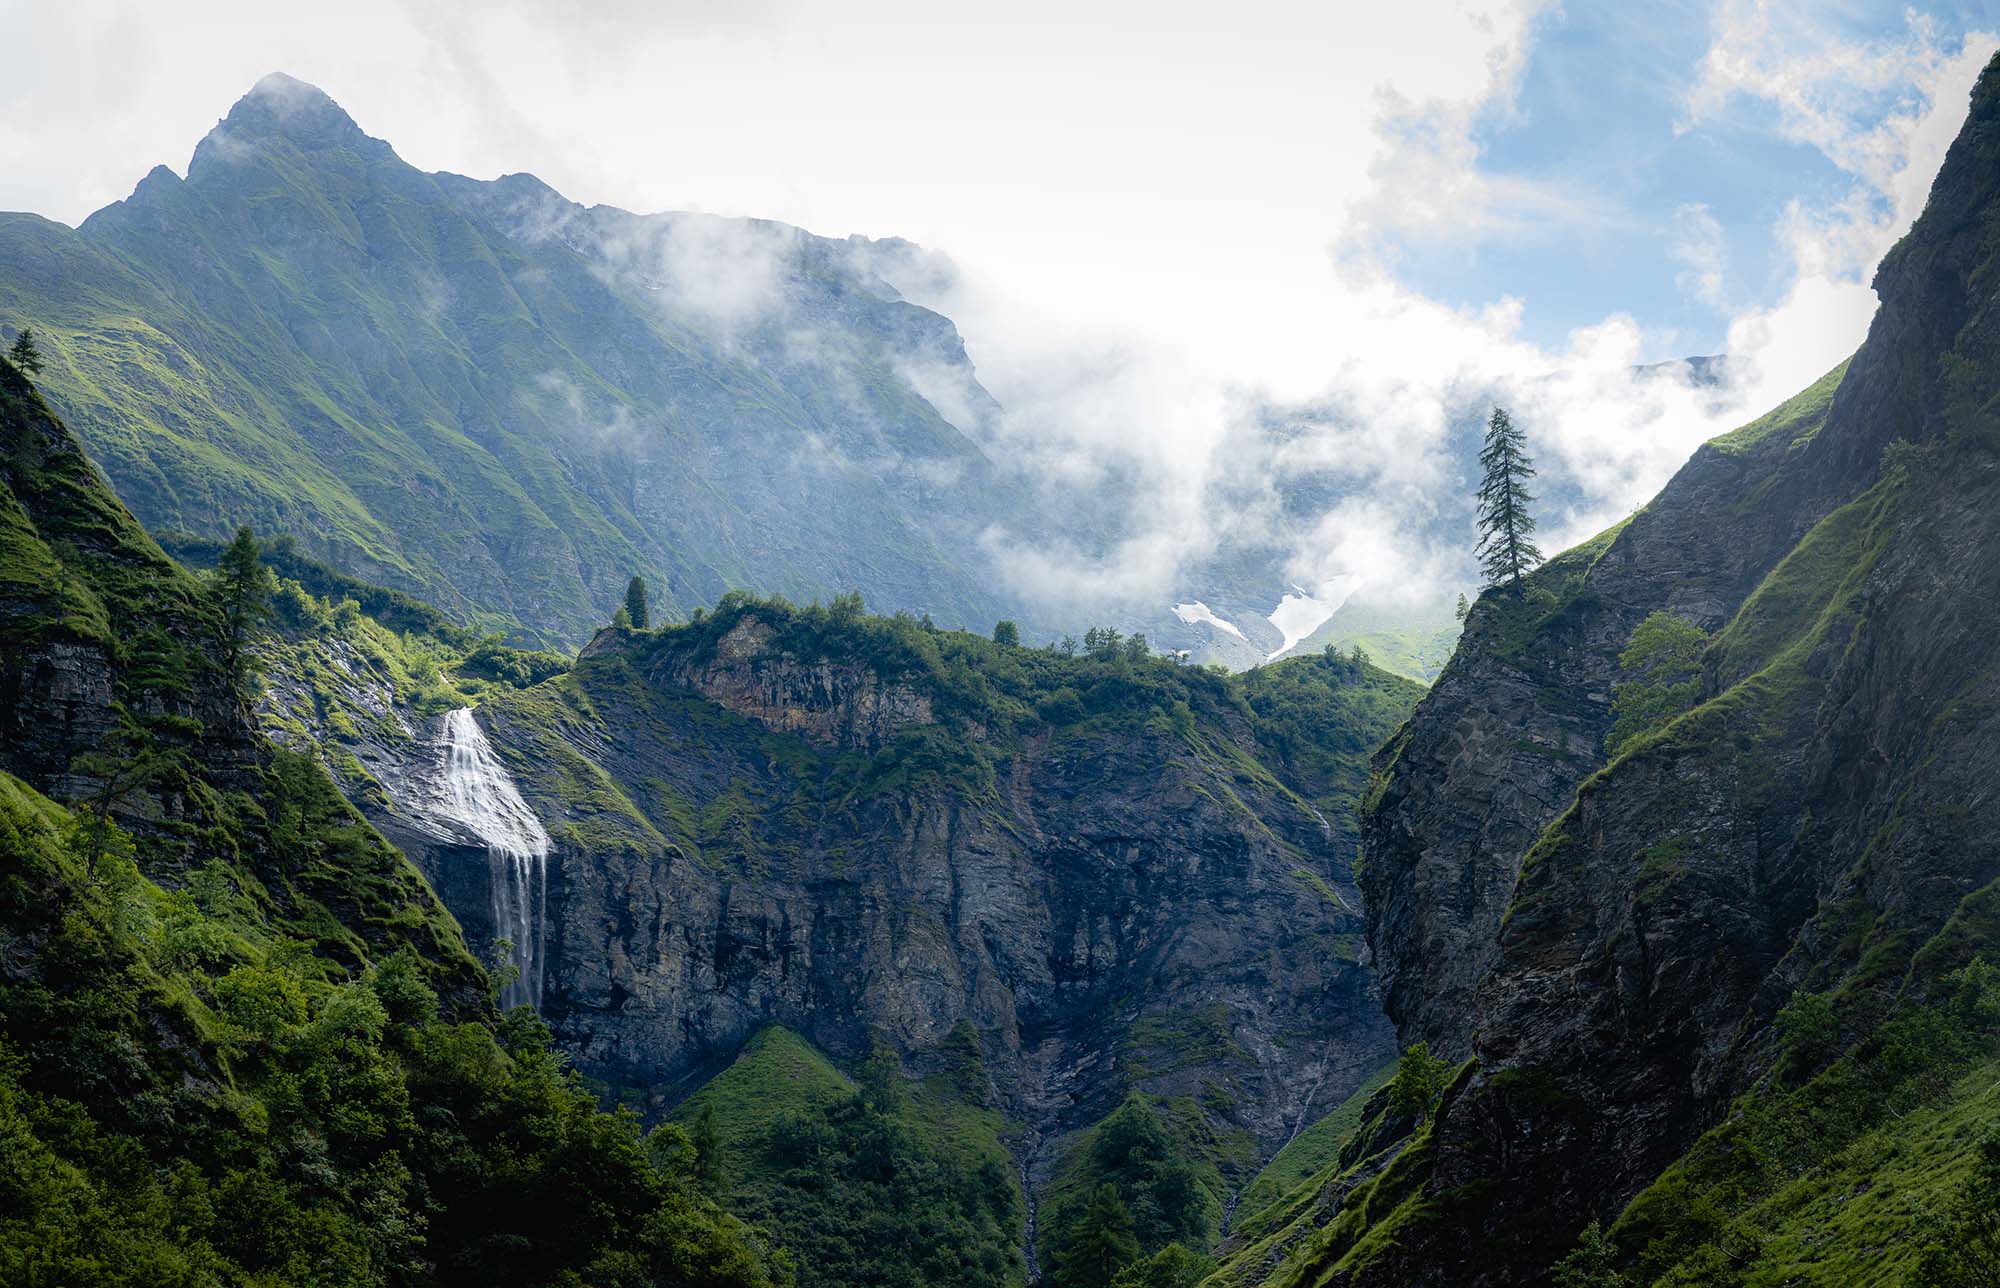 picture of landscape with mountains, trees and a waterfall in weisstannen switzerland